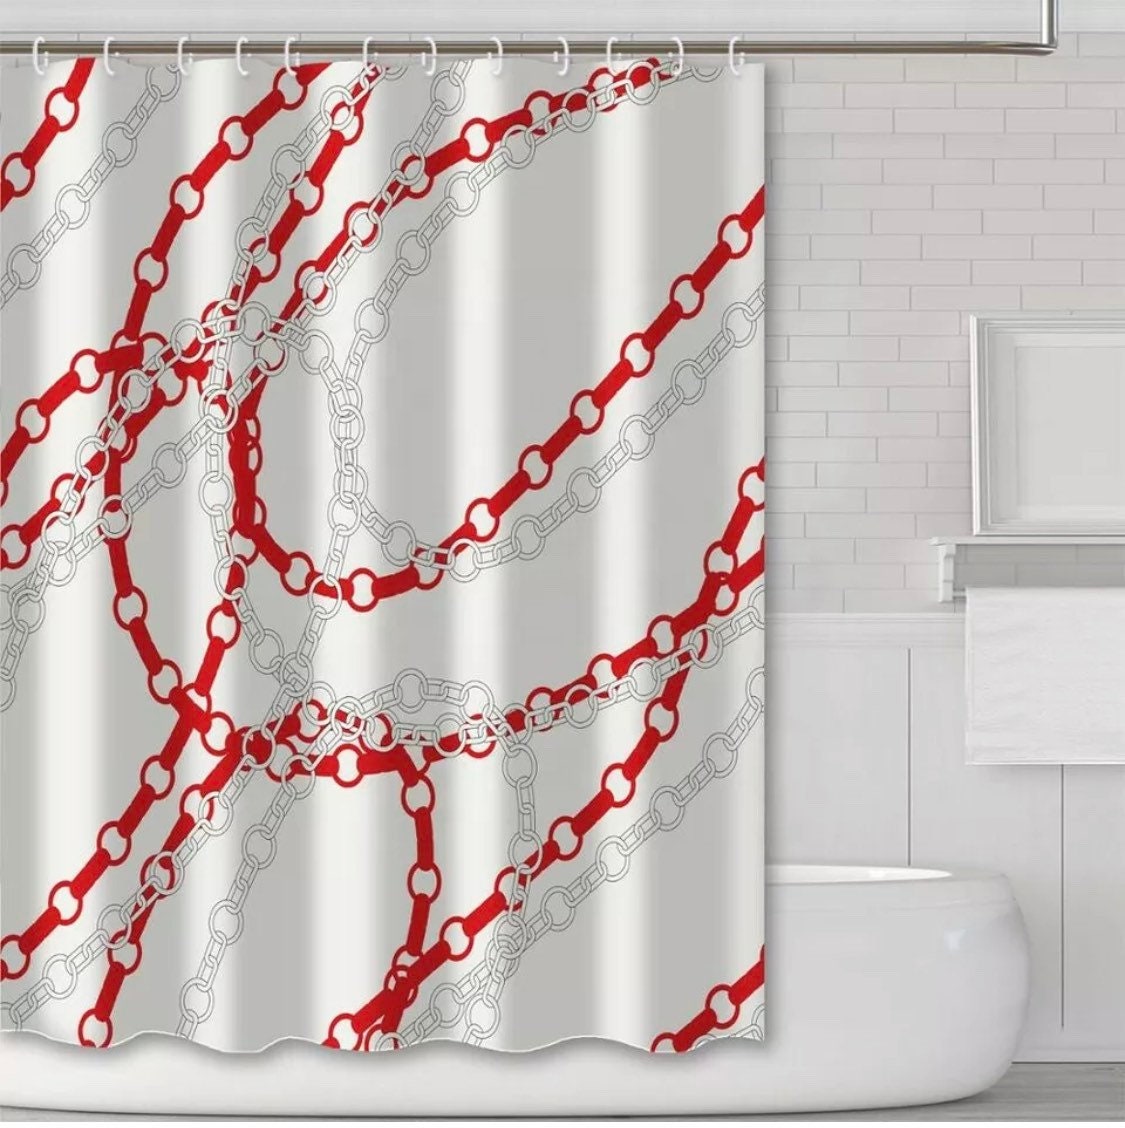 HQ 69"X70" 3D Printed Waterproof Fabric Bathroom Shower Curtain Set With Hooks 